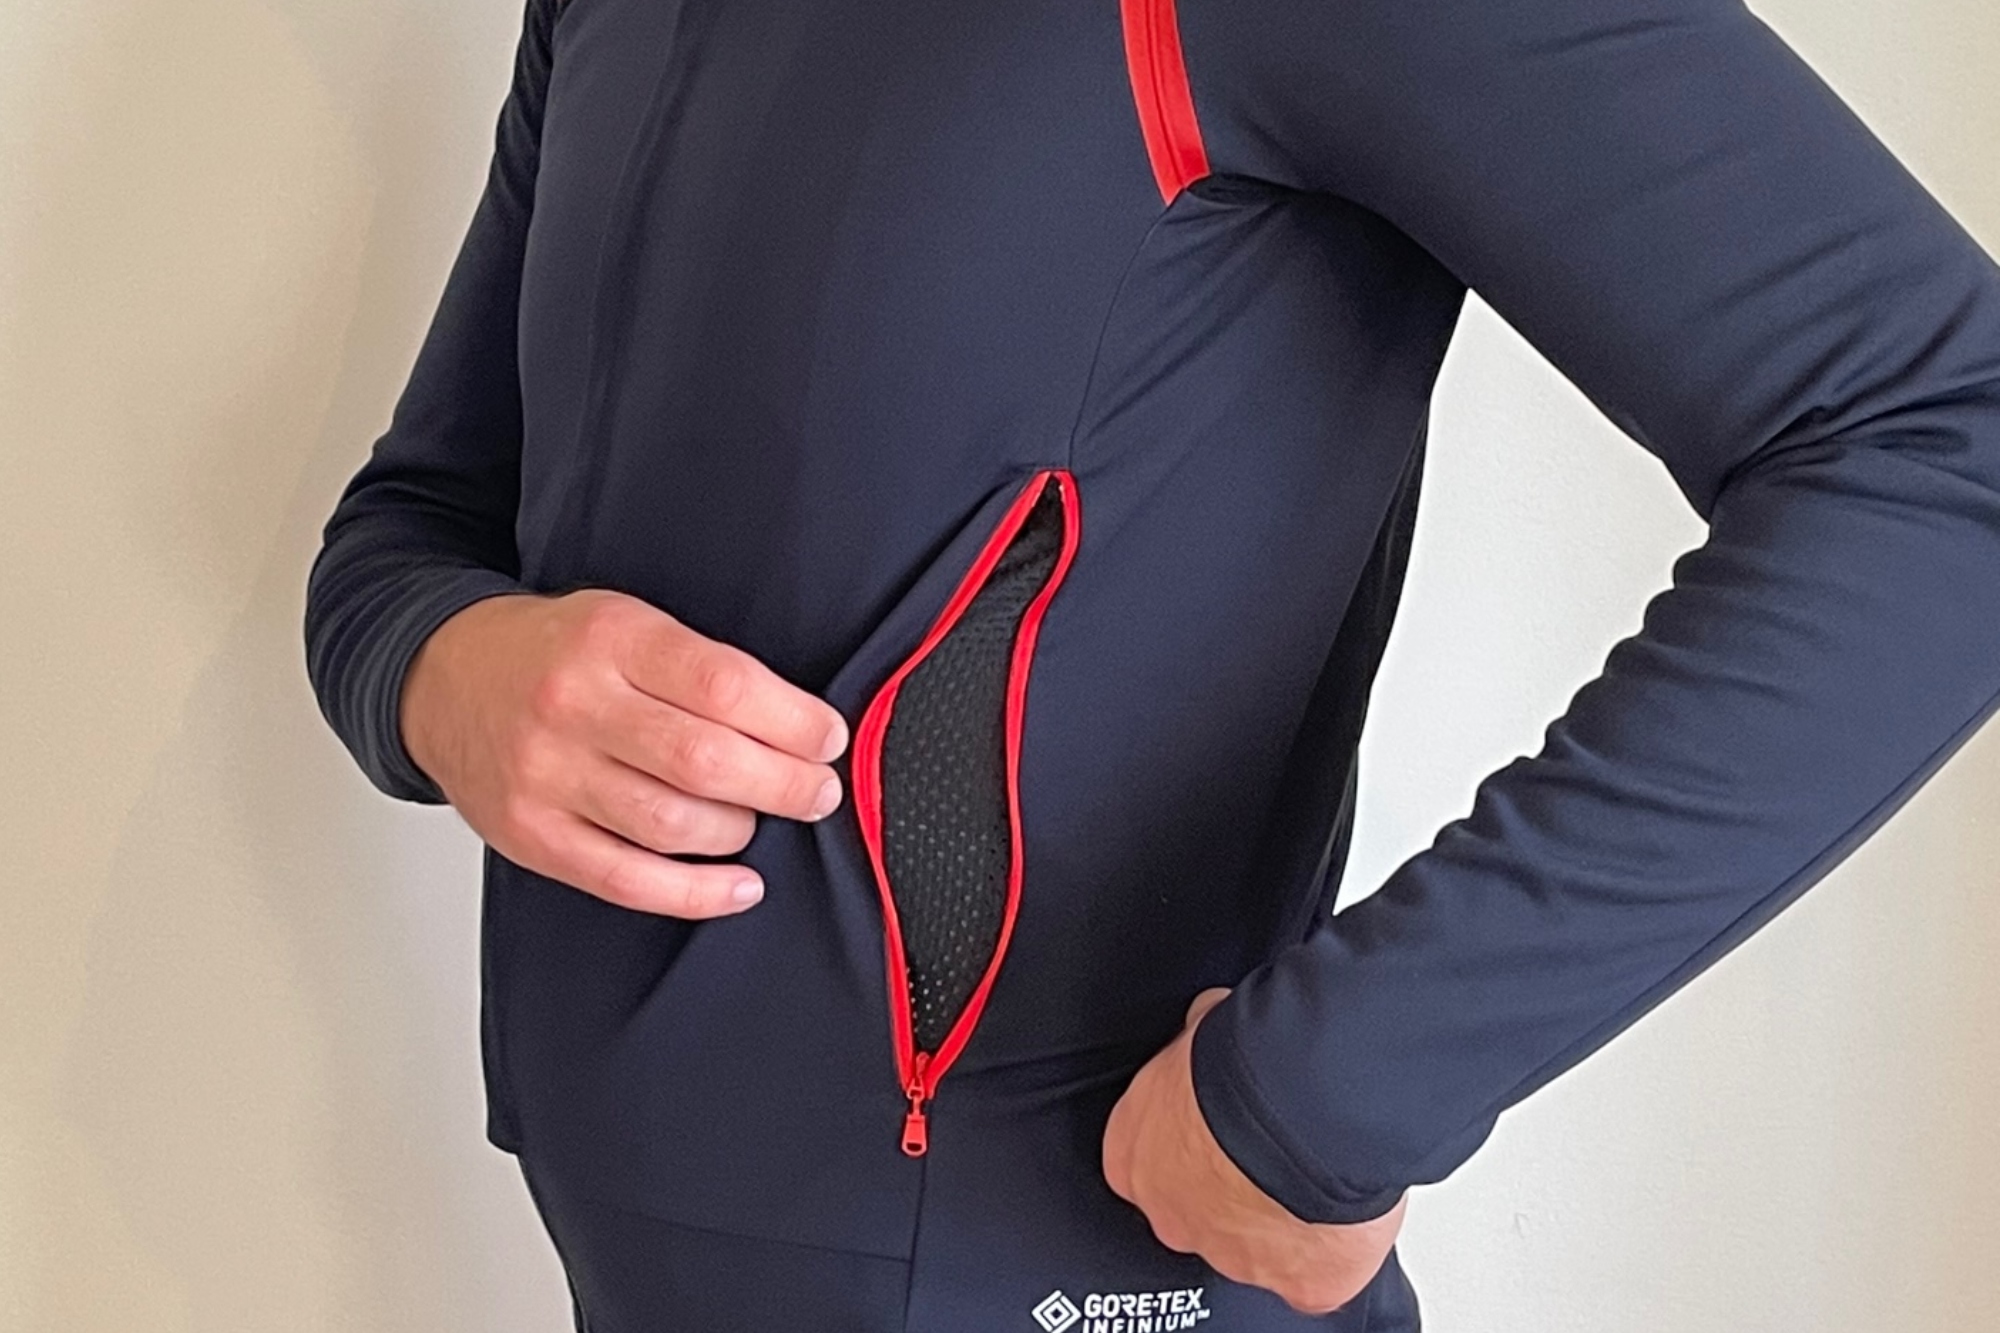 Vents on the Castelli Perfetto ROS long sleeve jacket.